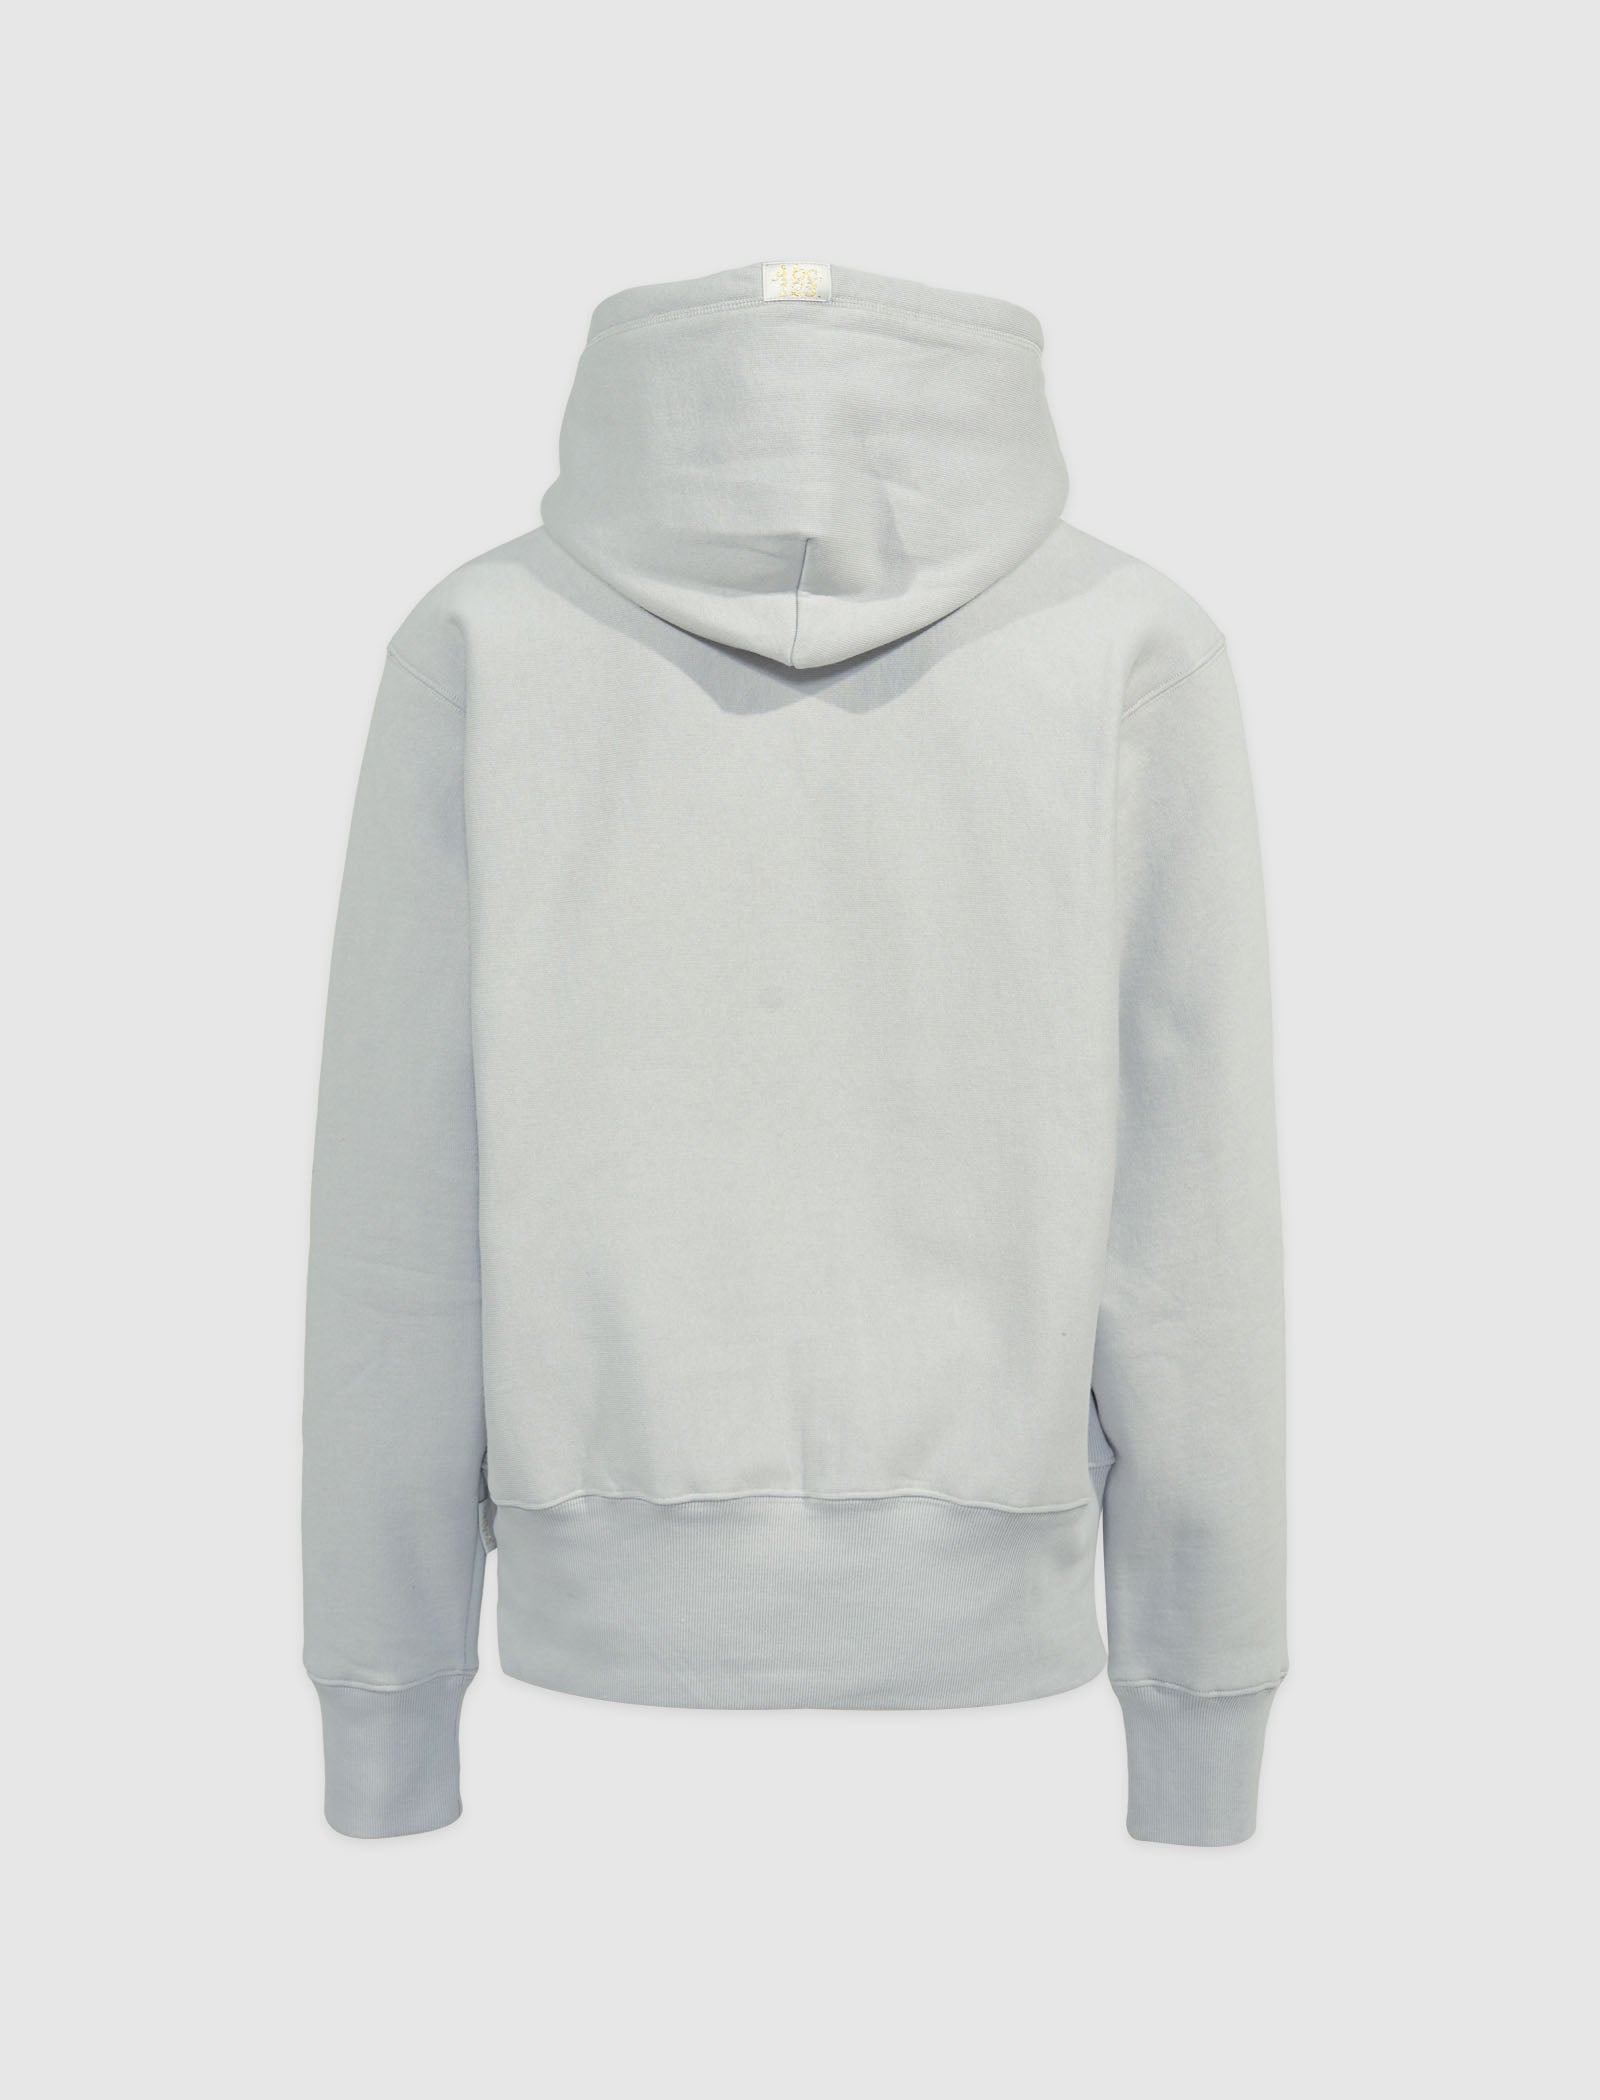 ABC 123. PULLOVER HOODIE